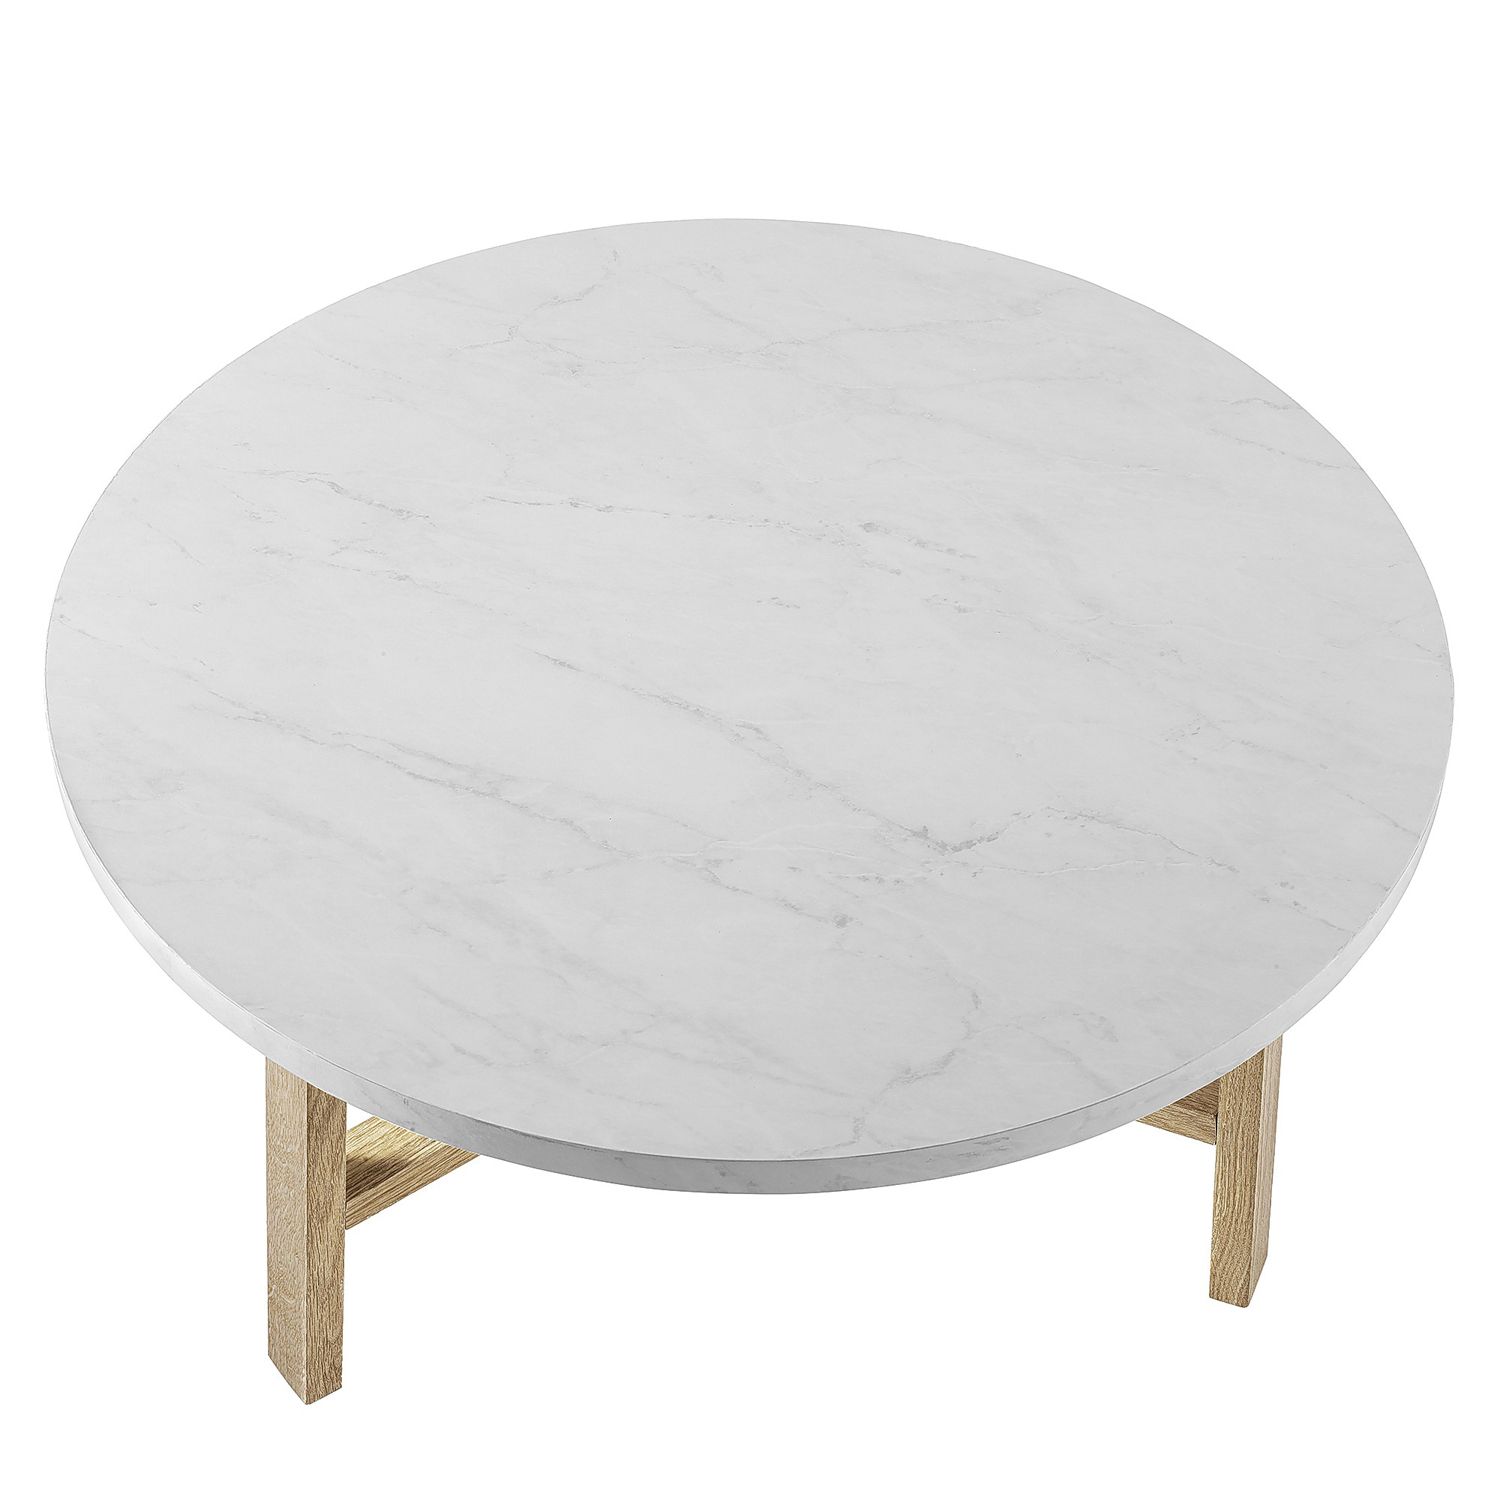 Well Known Modern Round Faux Marble Coffee Tables Regarding Modern White Faux Marble Round Coffee Table – Pier (View 6 of 15)